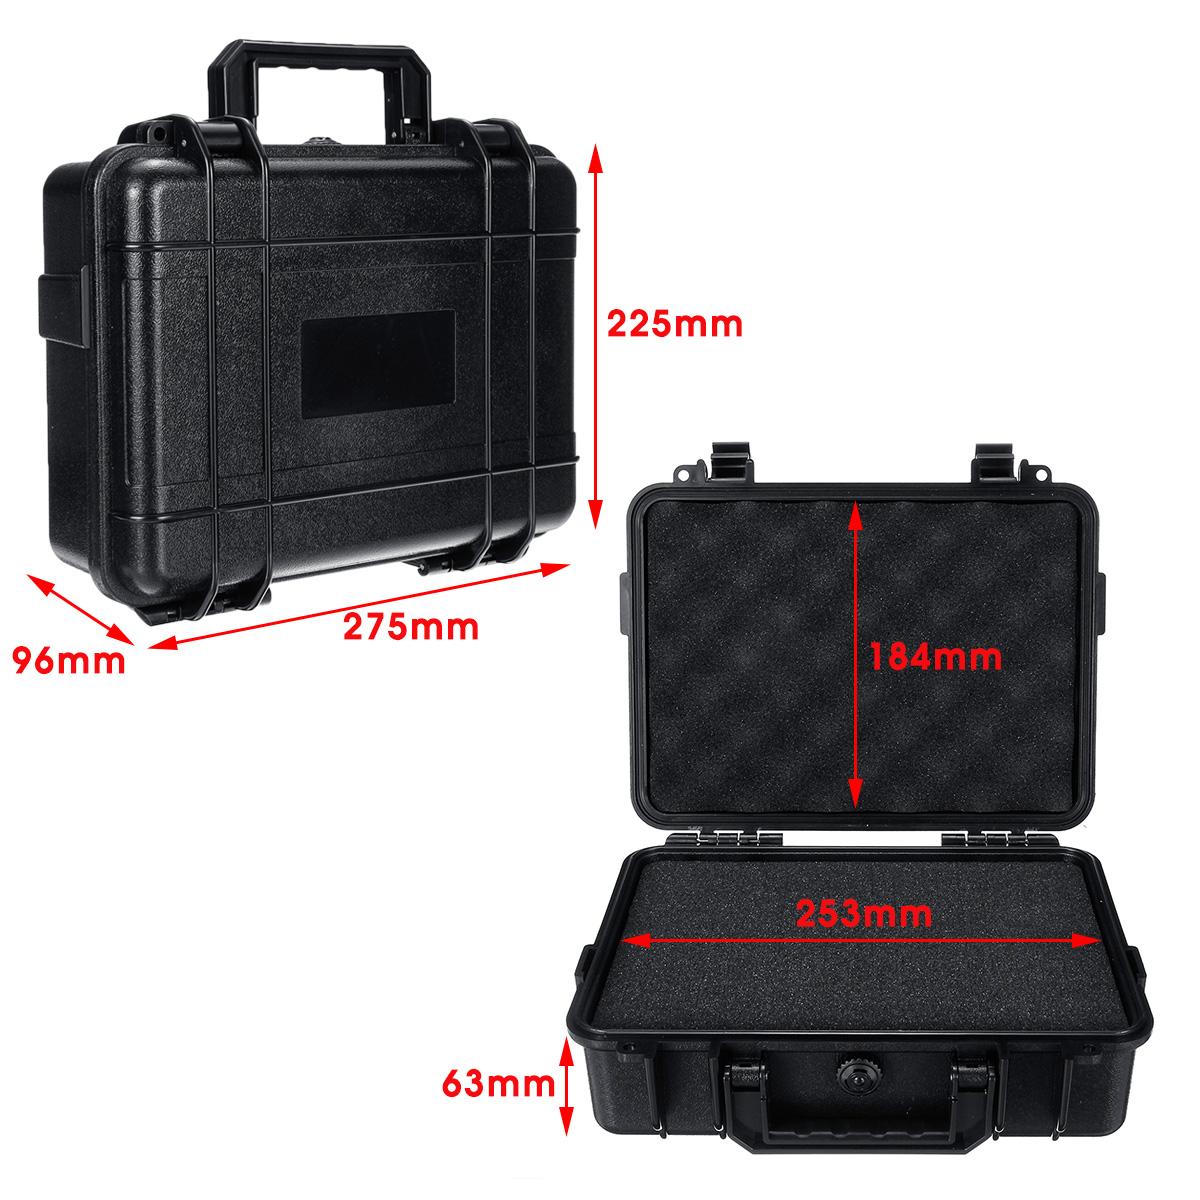 Outdoor-Portable-EDC-Instrument-Tool-Kits-Box-Waterproof-Shockproof-Protective-Safety-Storage-Case-1553948-9